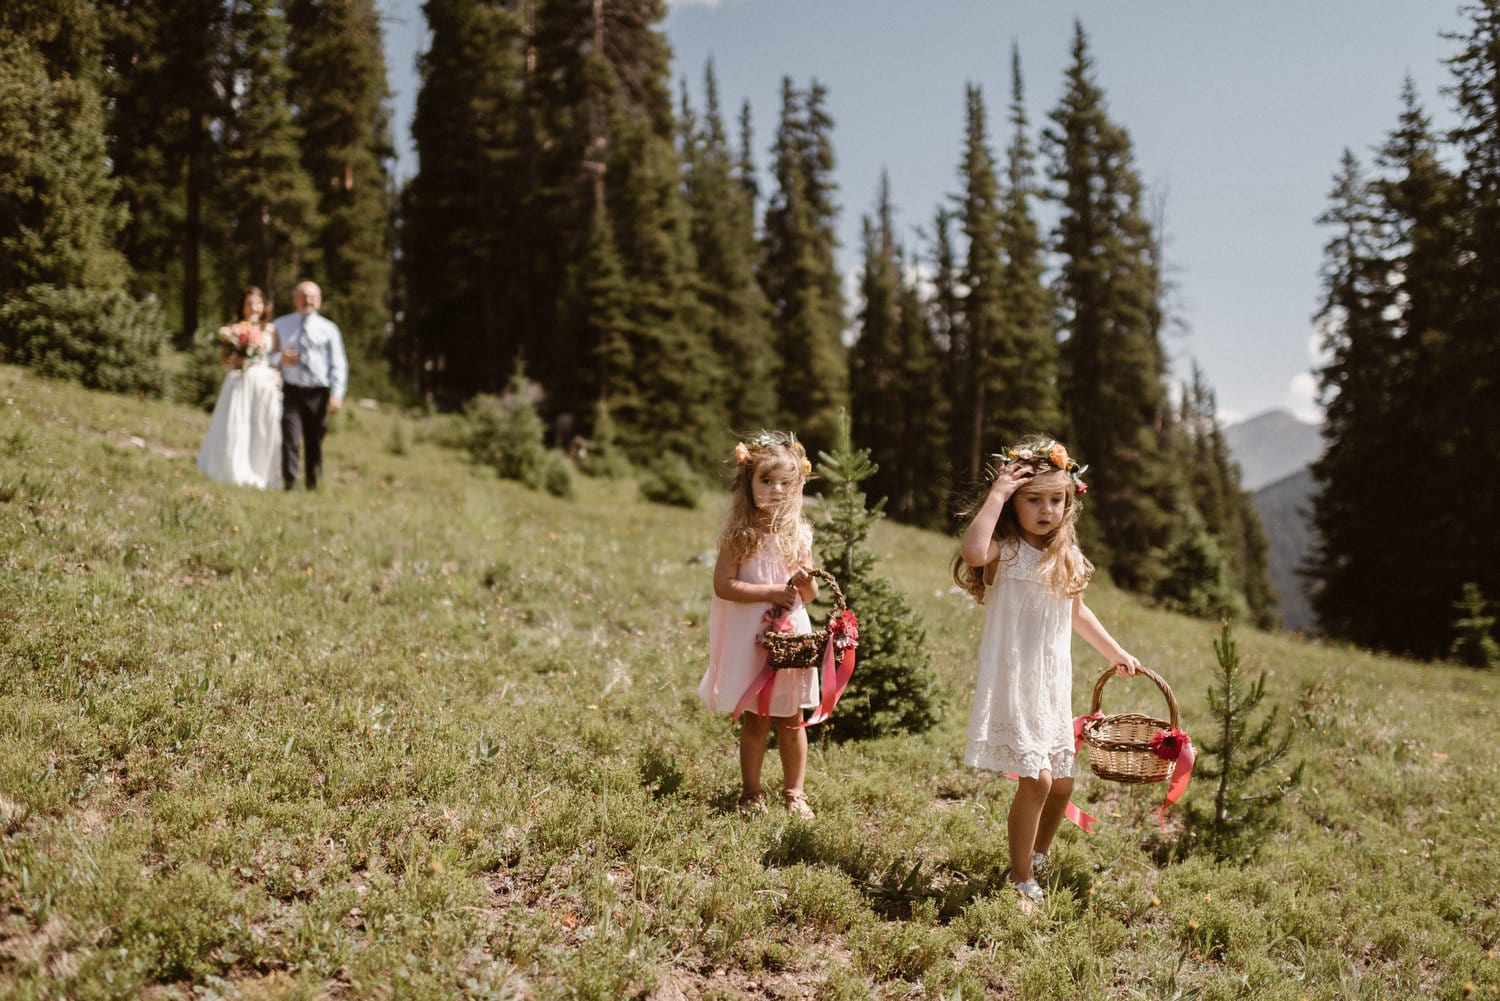 Two young girls wearing flower crowns and holding baskets, walking in front of bride and her father. There are pine trees in the background.